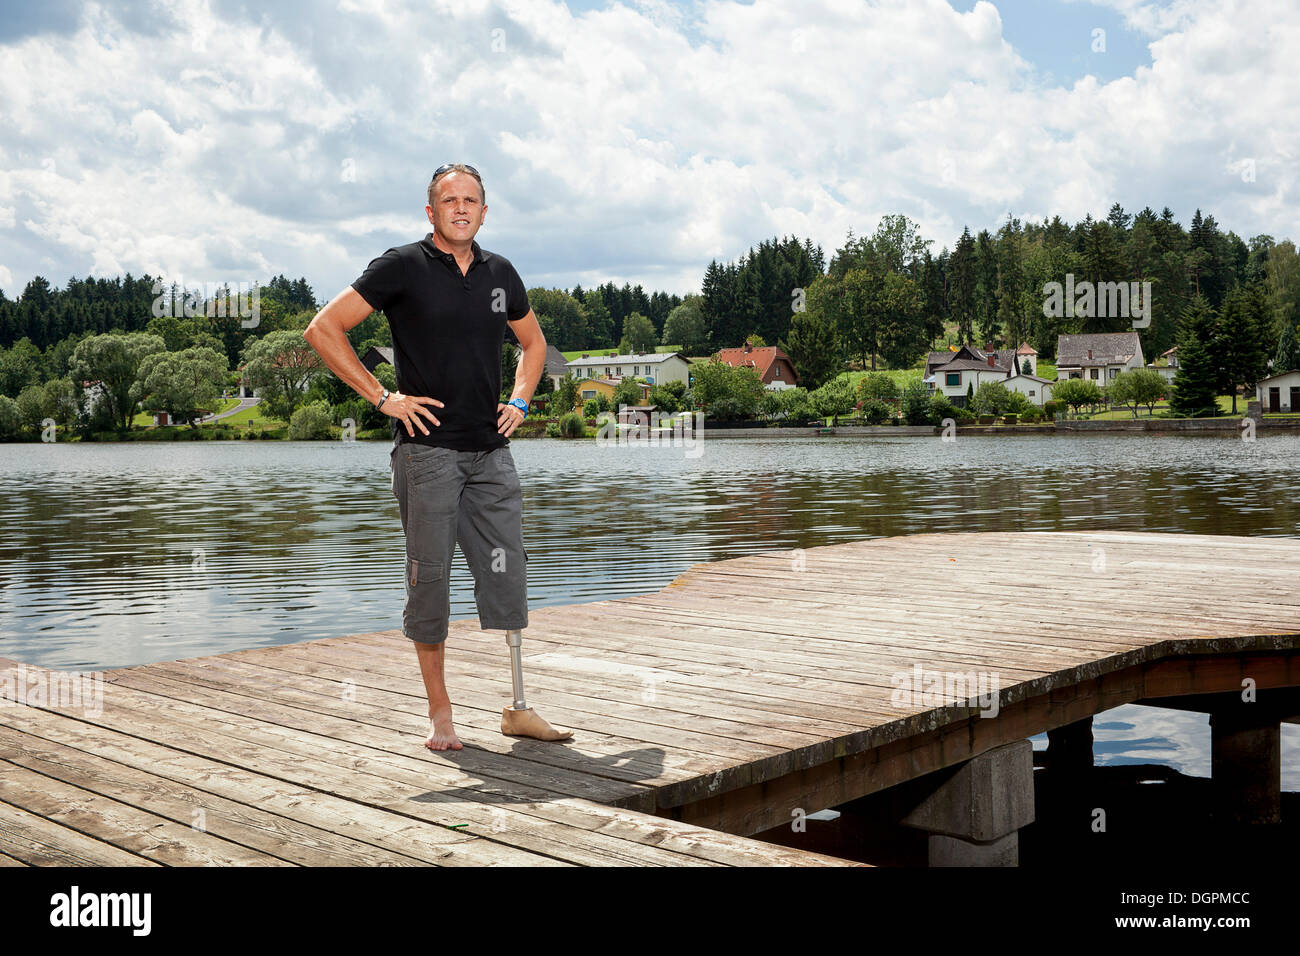 Man with a prosthetic leg standing on a jetty Stock Photo